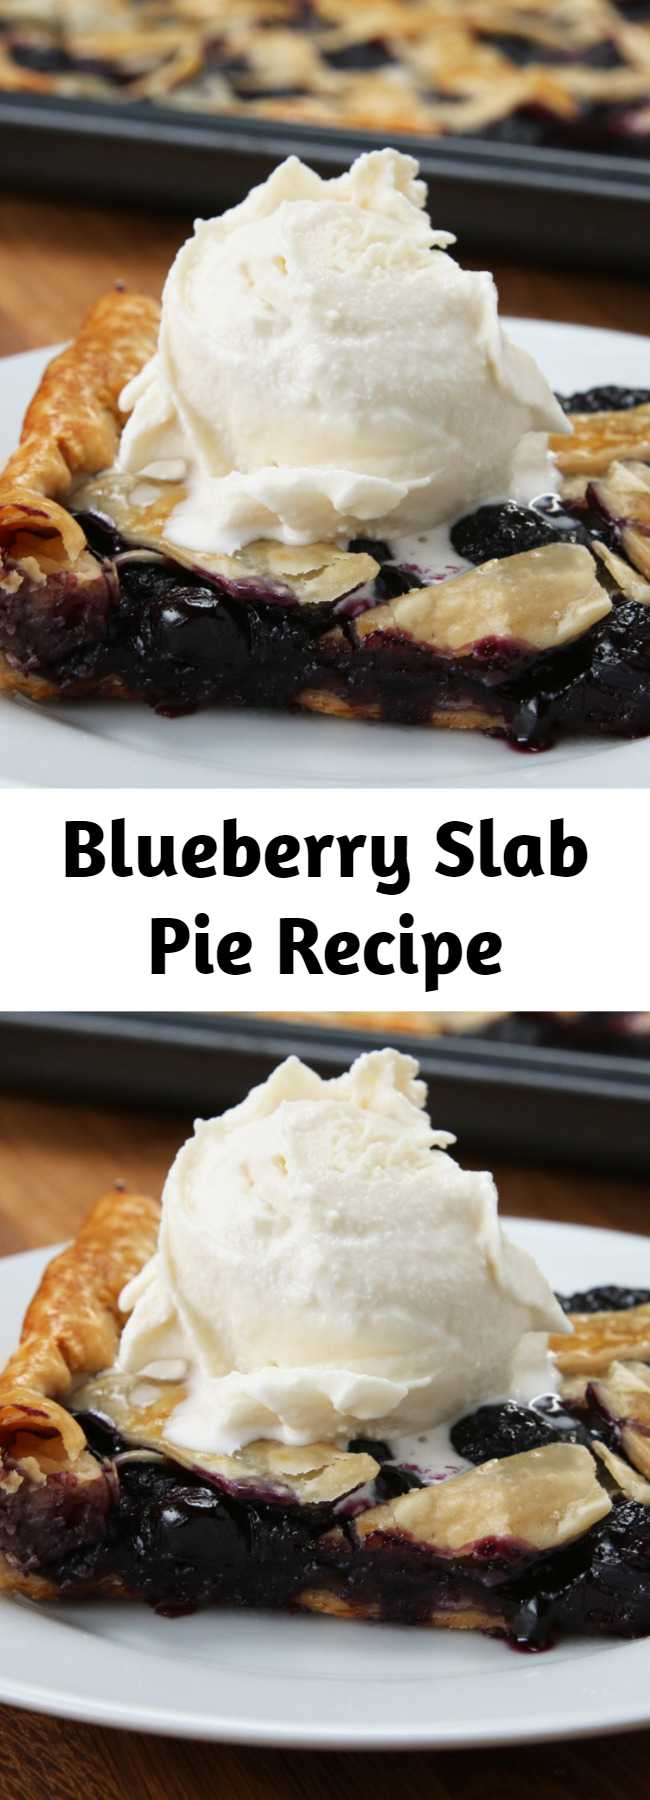 Blueberry Slab Pie Recipe - It looked and tasted great. Highly recommend with whipped cream! Delicious summer dessert!